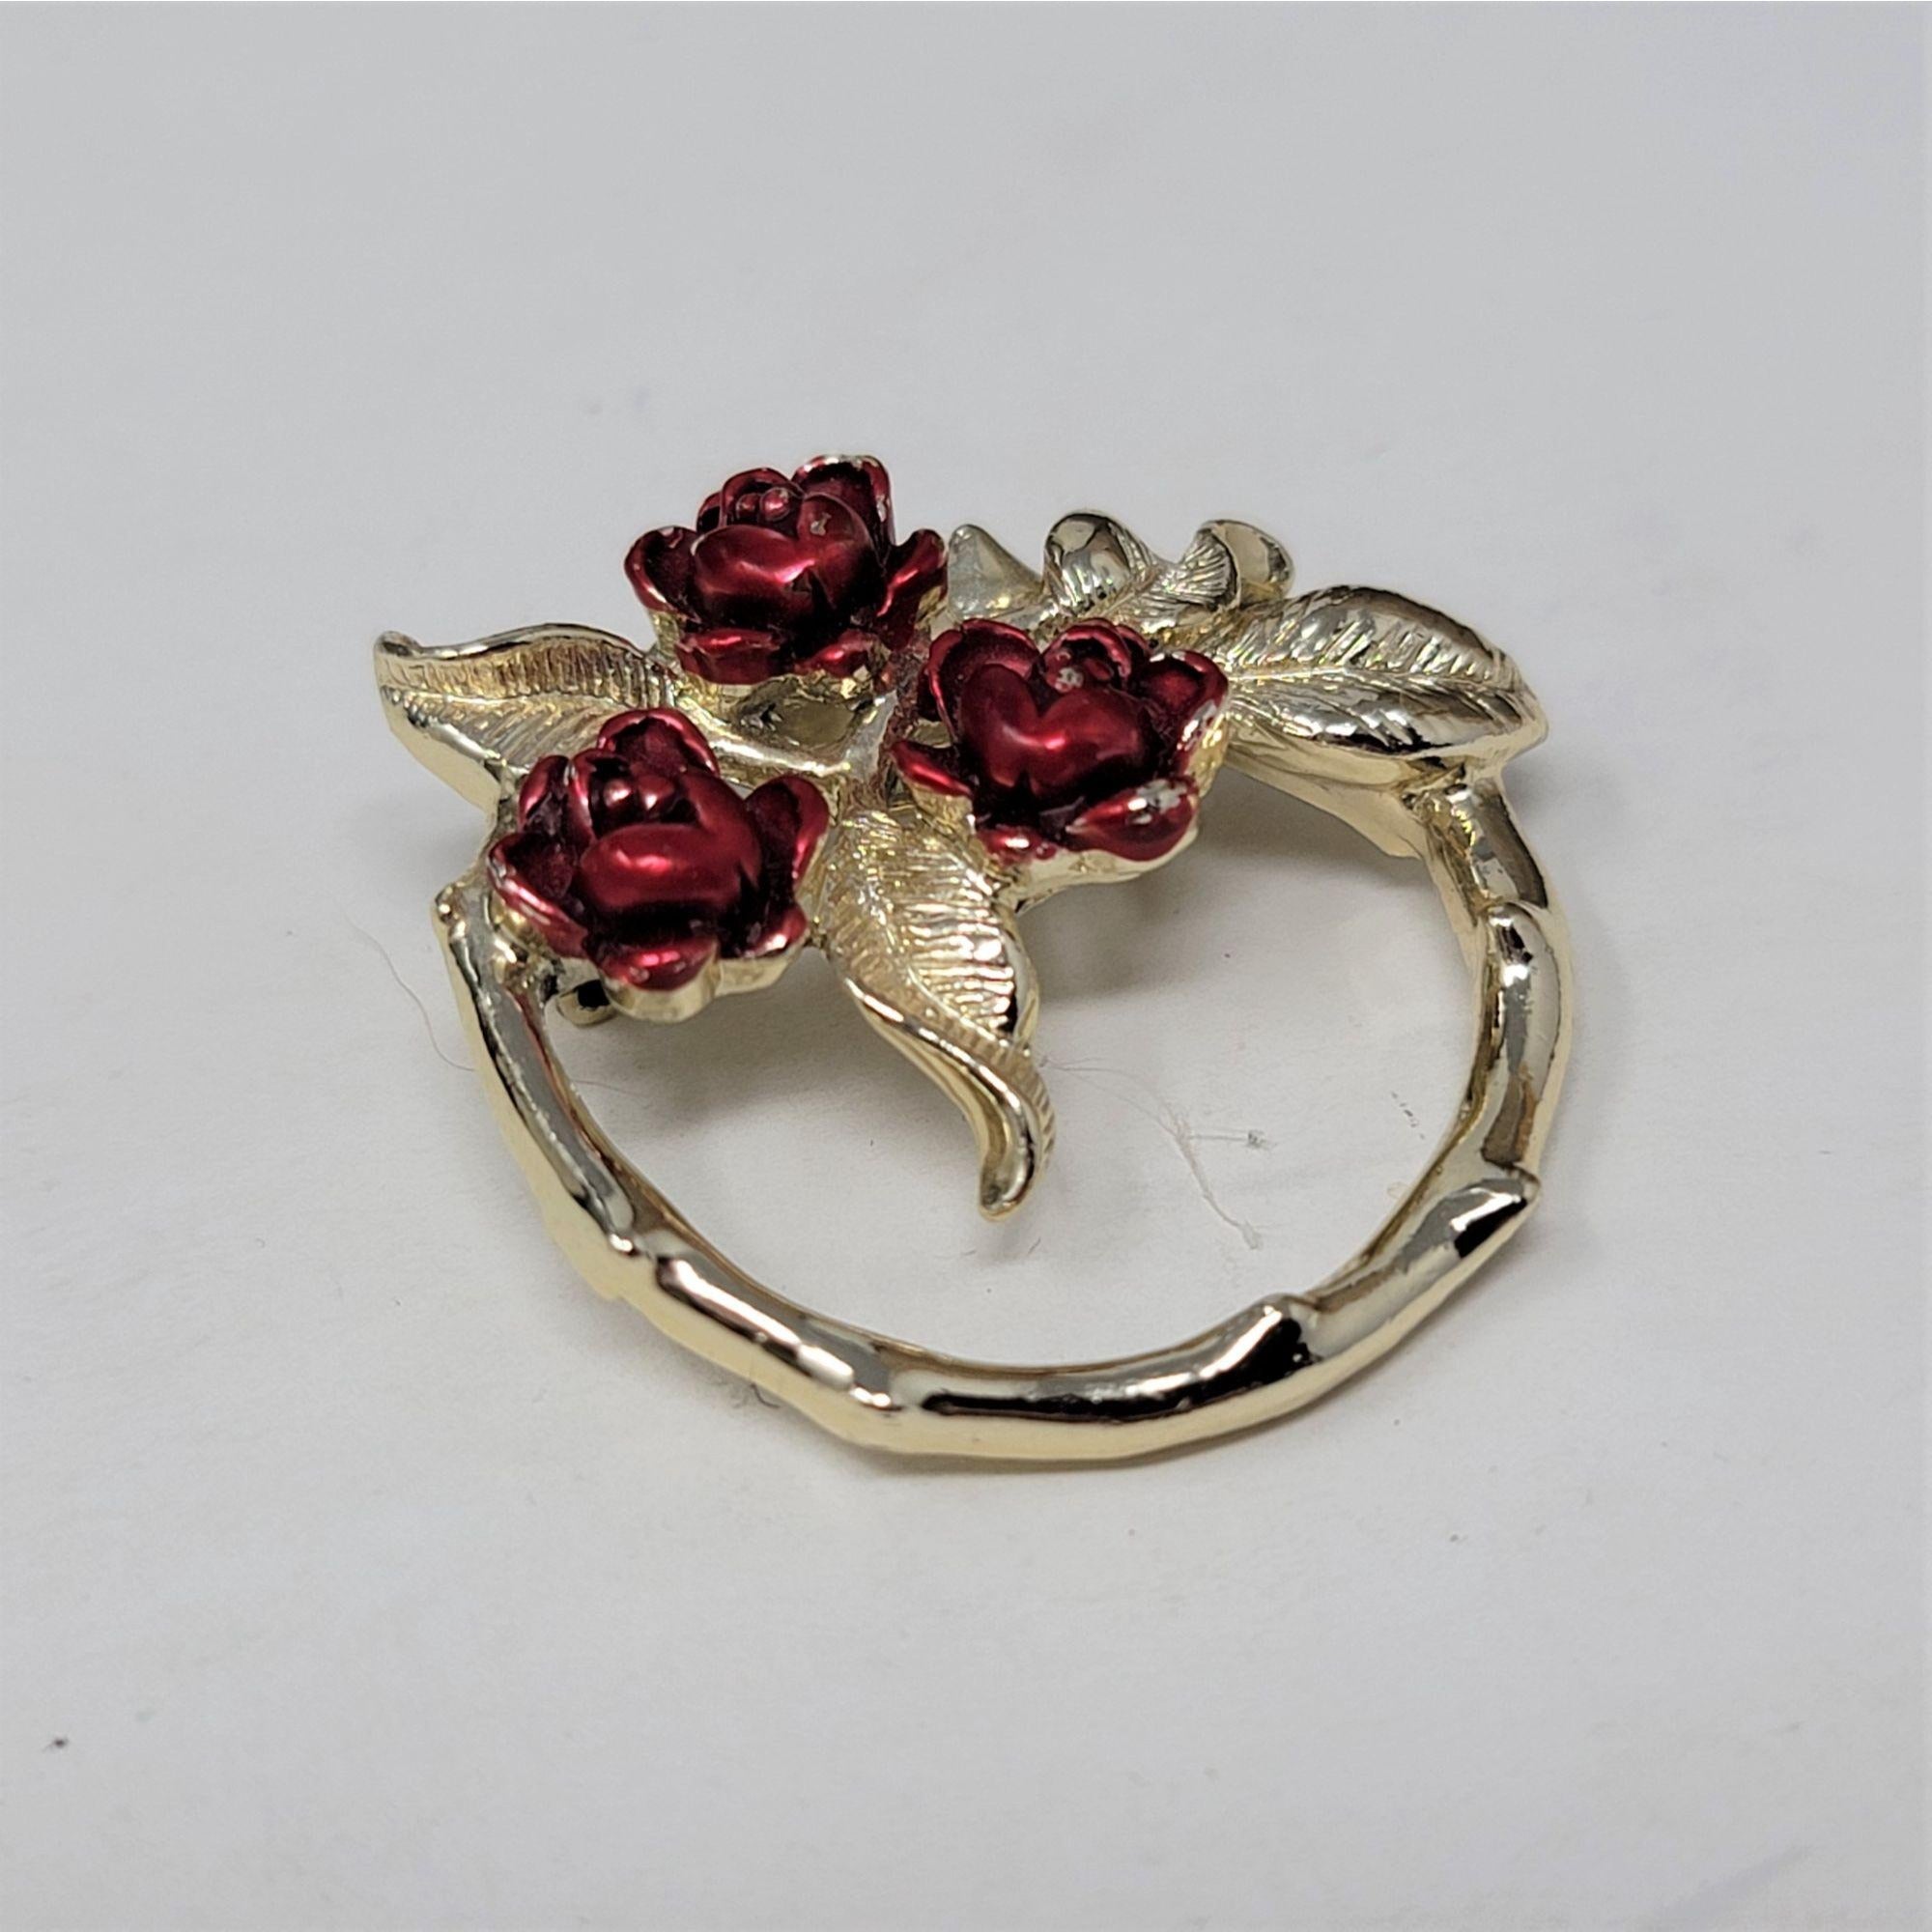 Gerry Vintage Circle Pin Brooch Red Flowers Silver